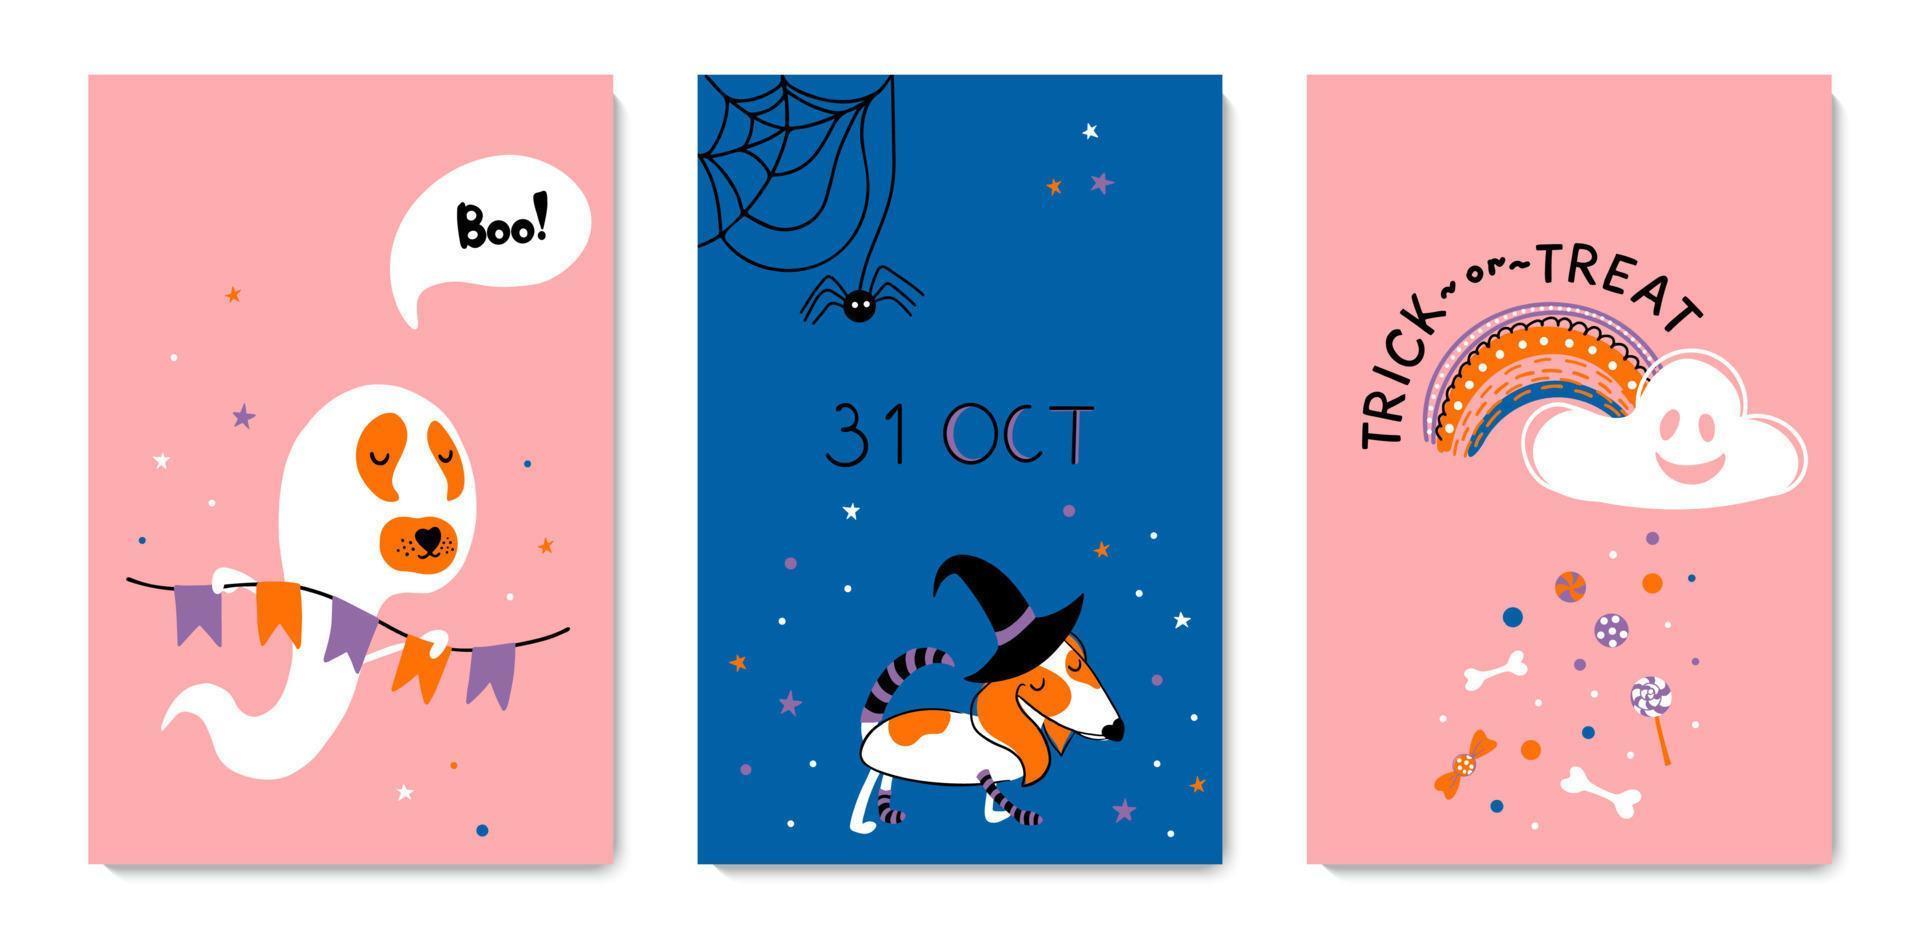 Happy Halloween set prints with cute characters like dog, ghost, rainbow. Colorful vector illustrations for posters, invitations, greeting cards. Cute dog in Halloween pet costume.